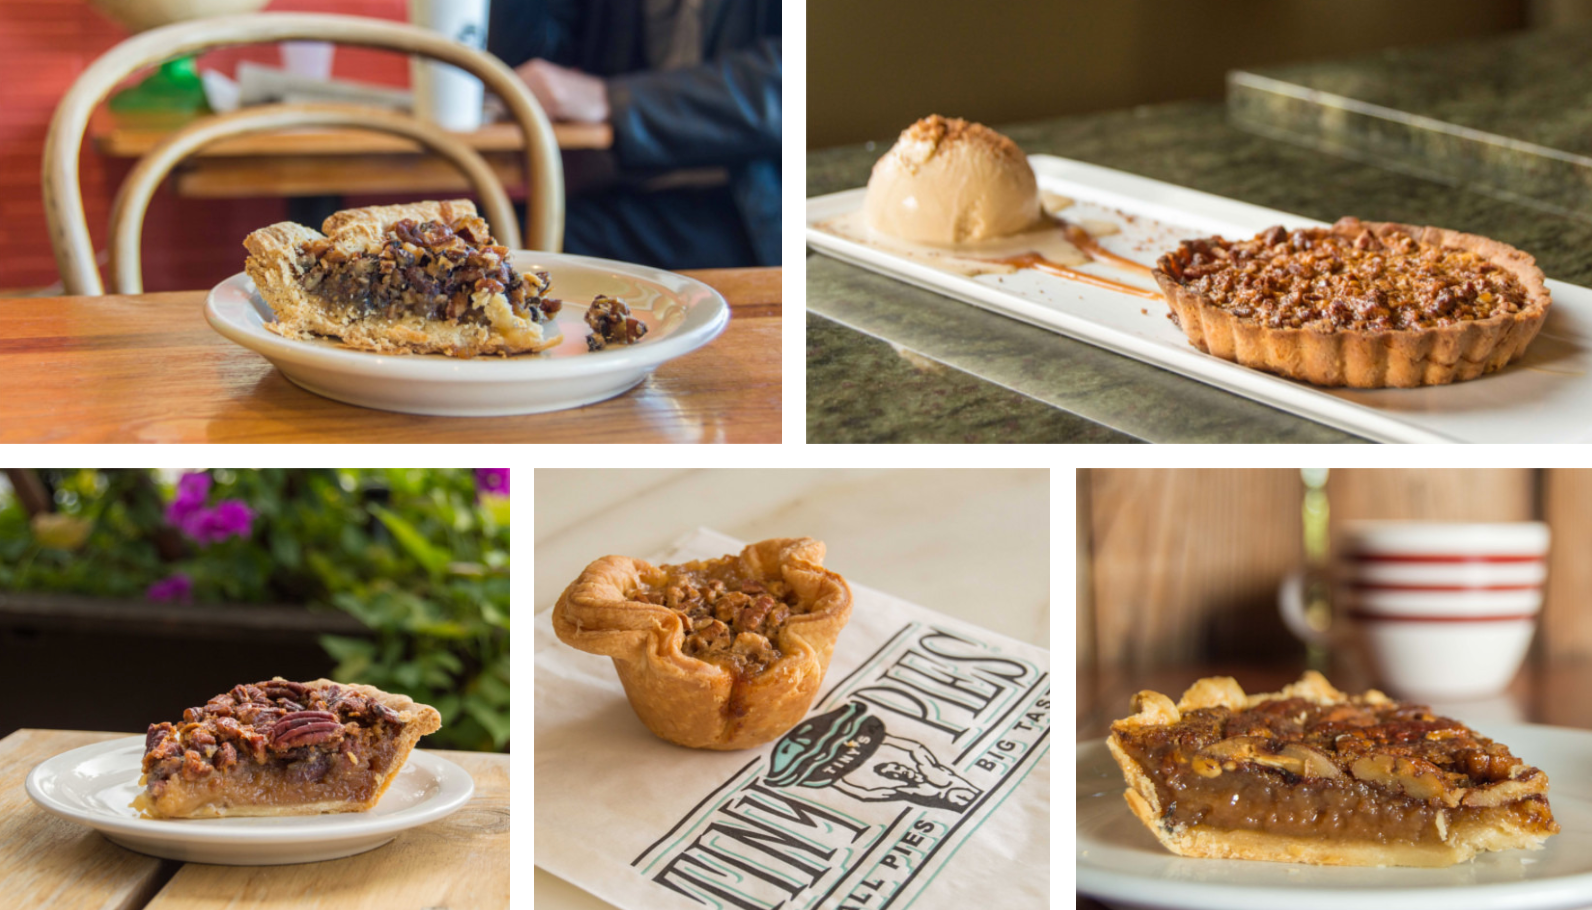 5 Places That Serve Outstanding Pecan Pie in Austin